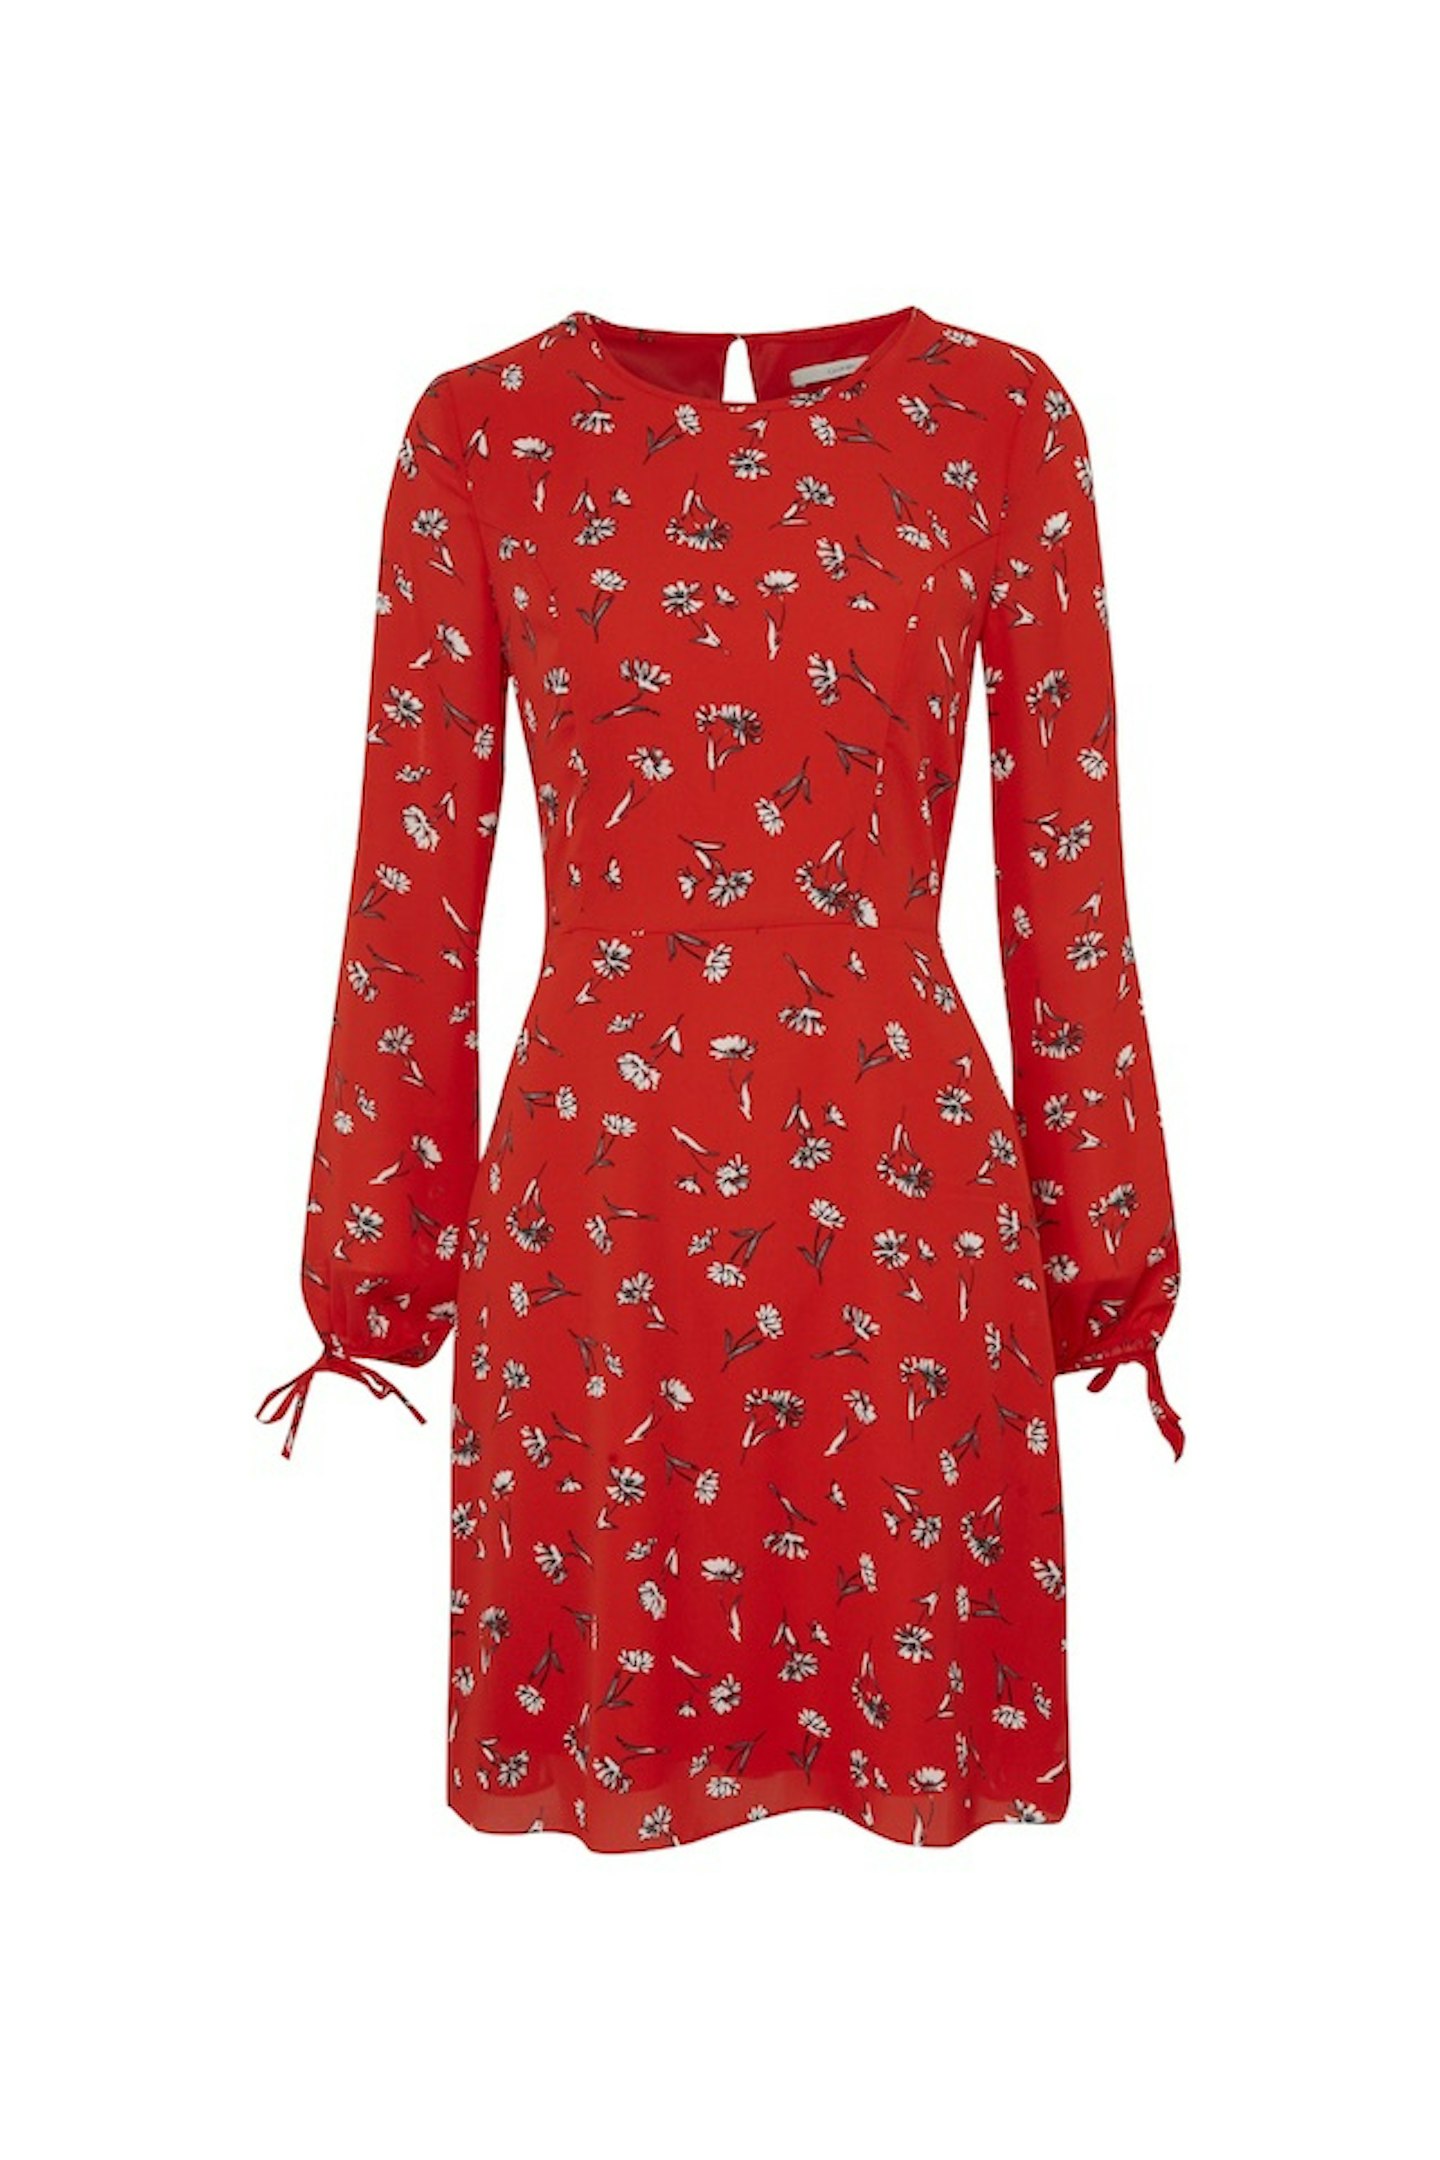 Red floral dress from ASDA